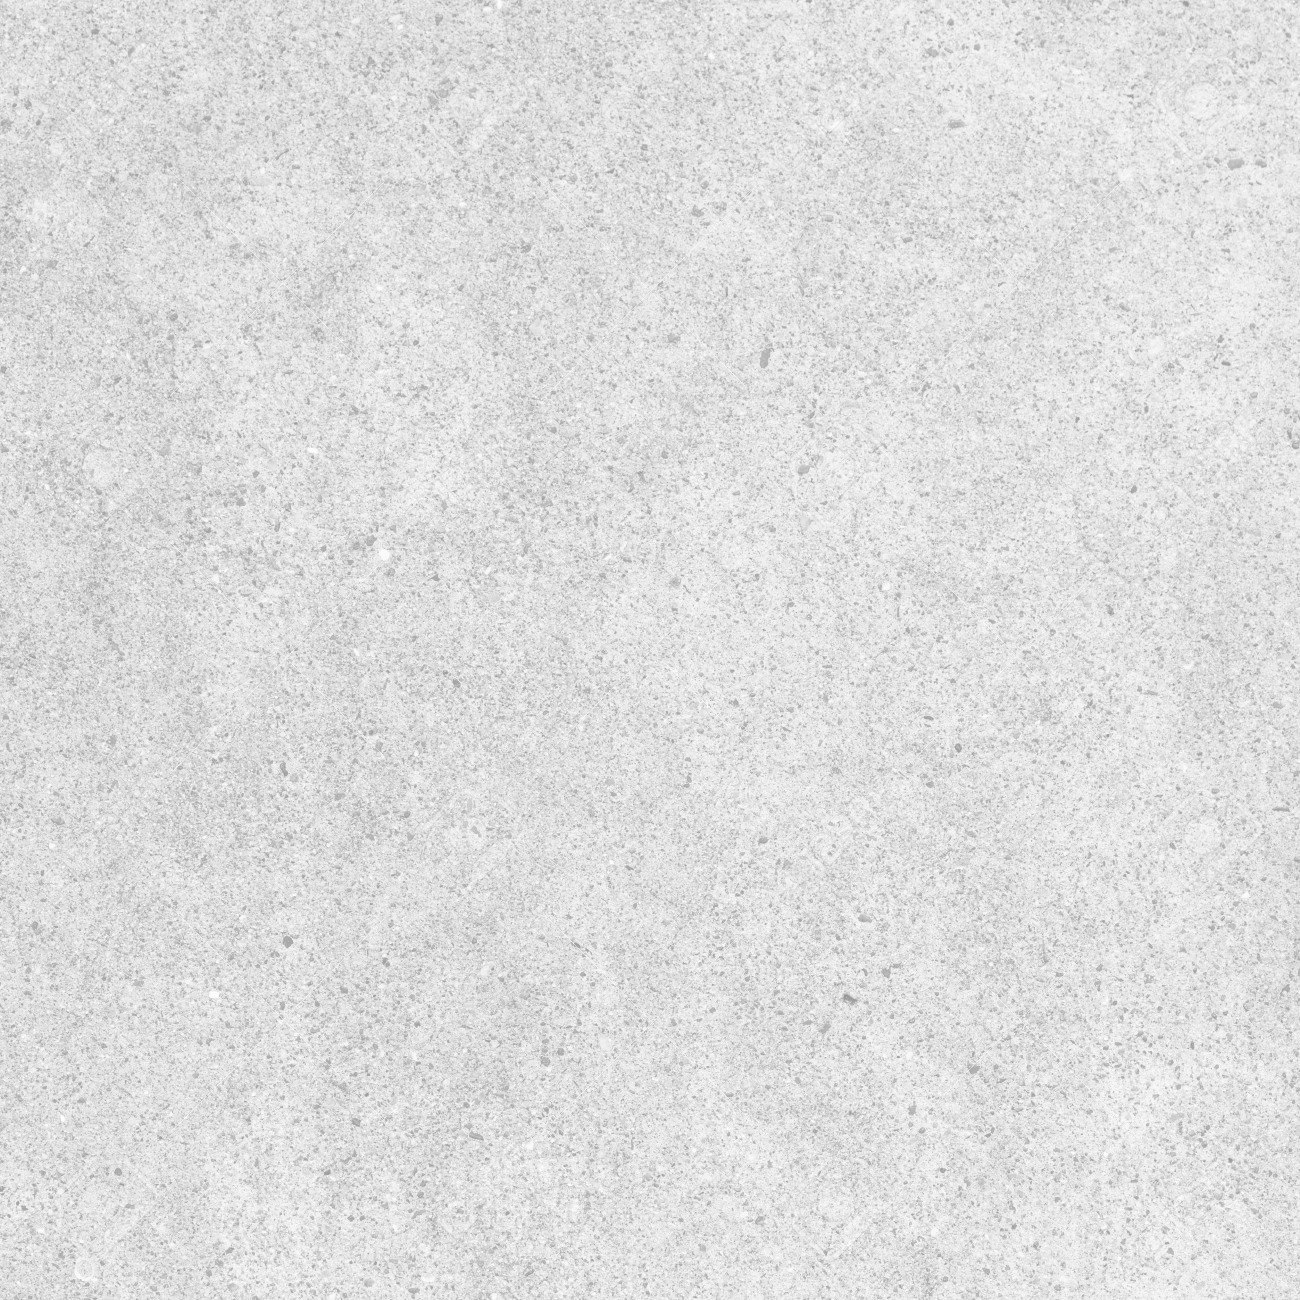 stone48224652-natural-grey-stone-texture-and-seamless-background -